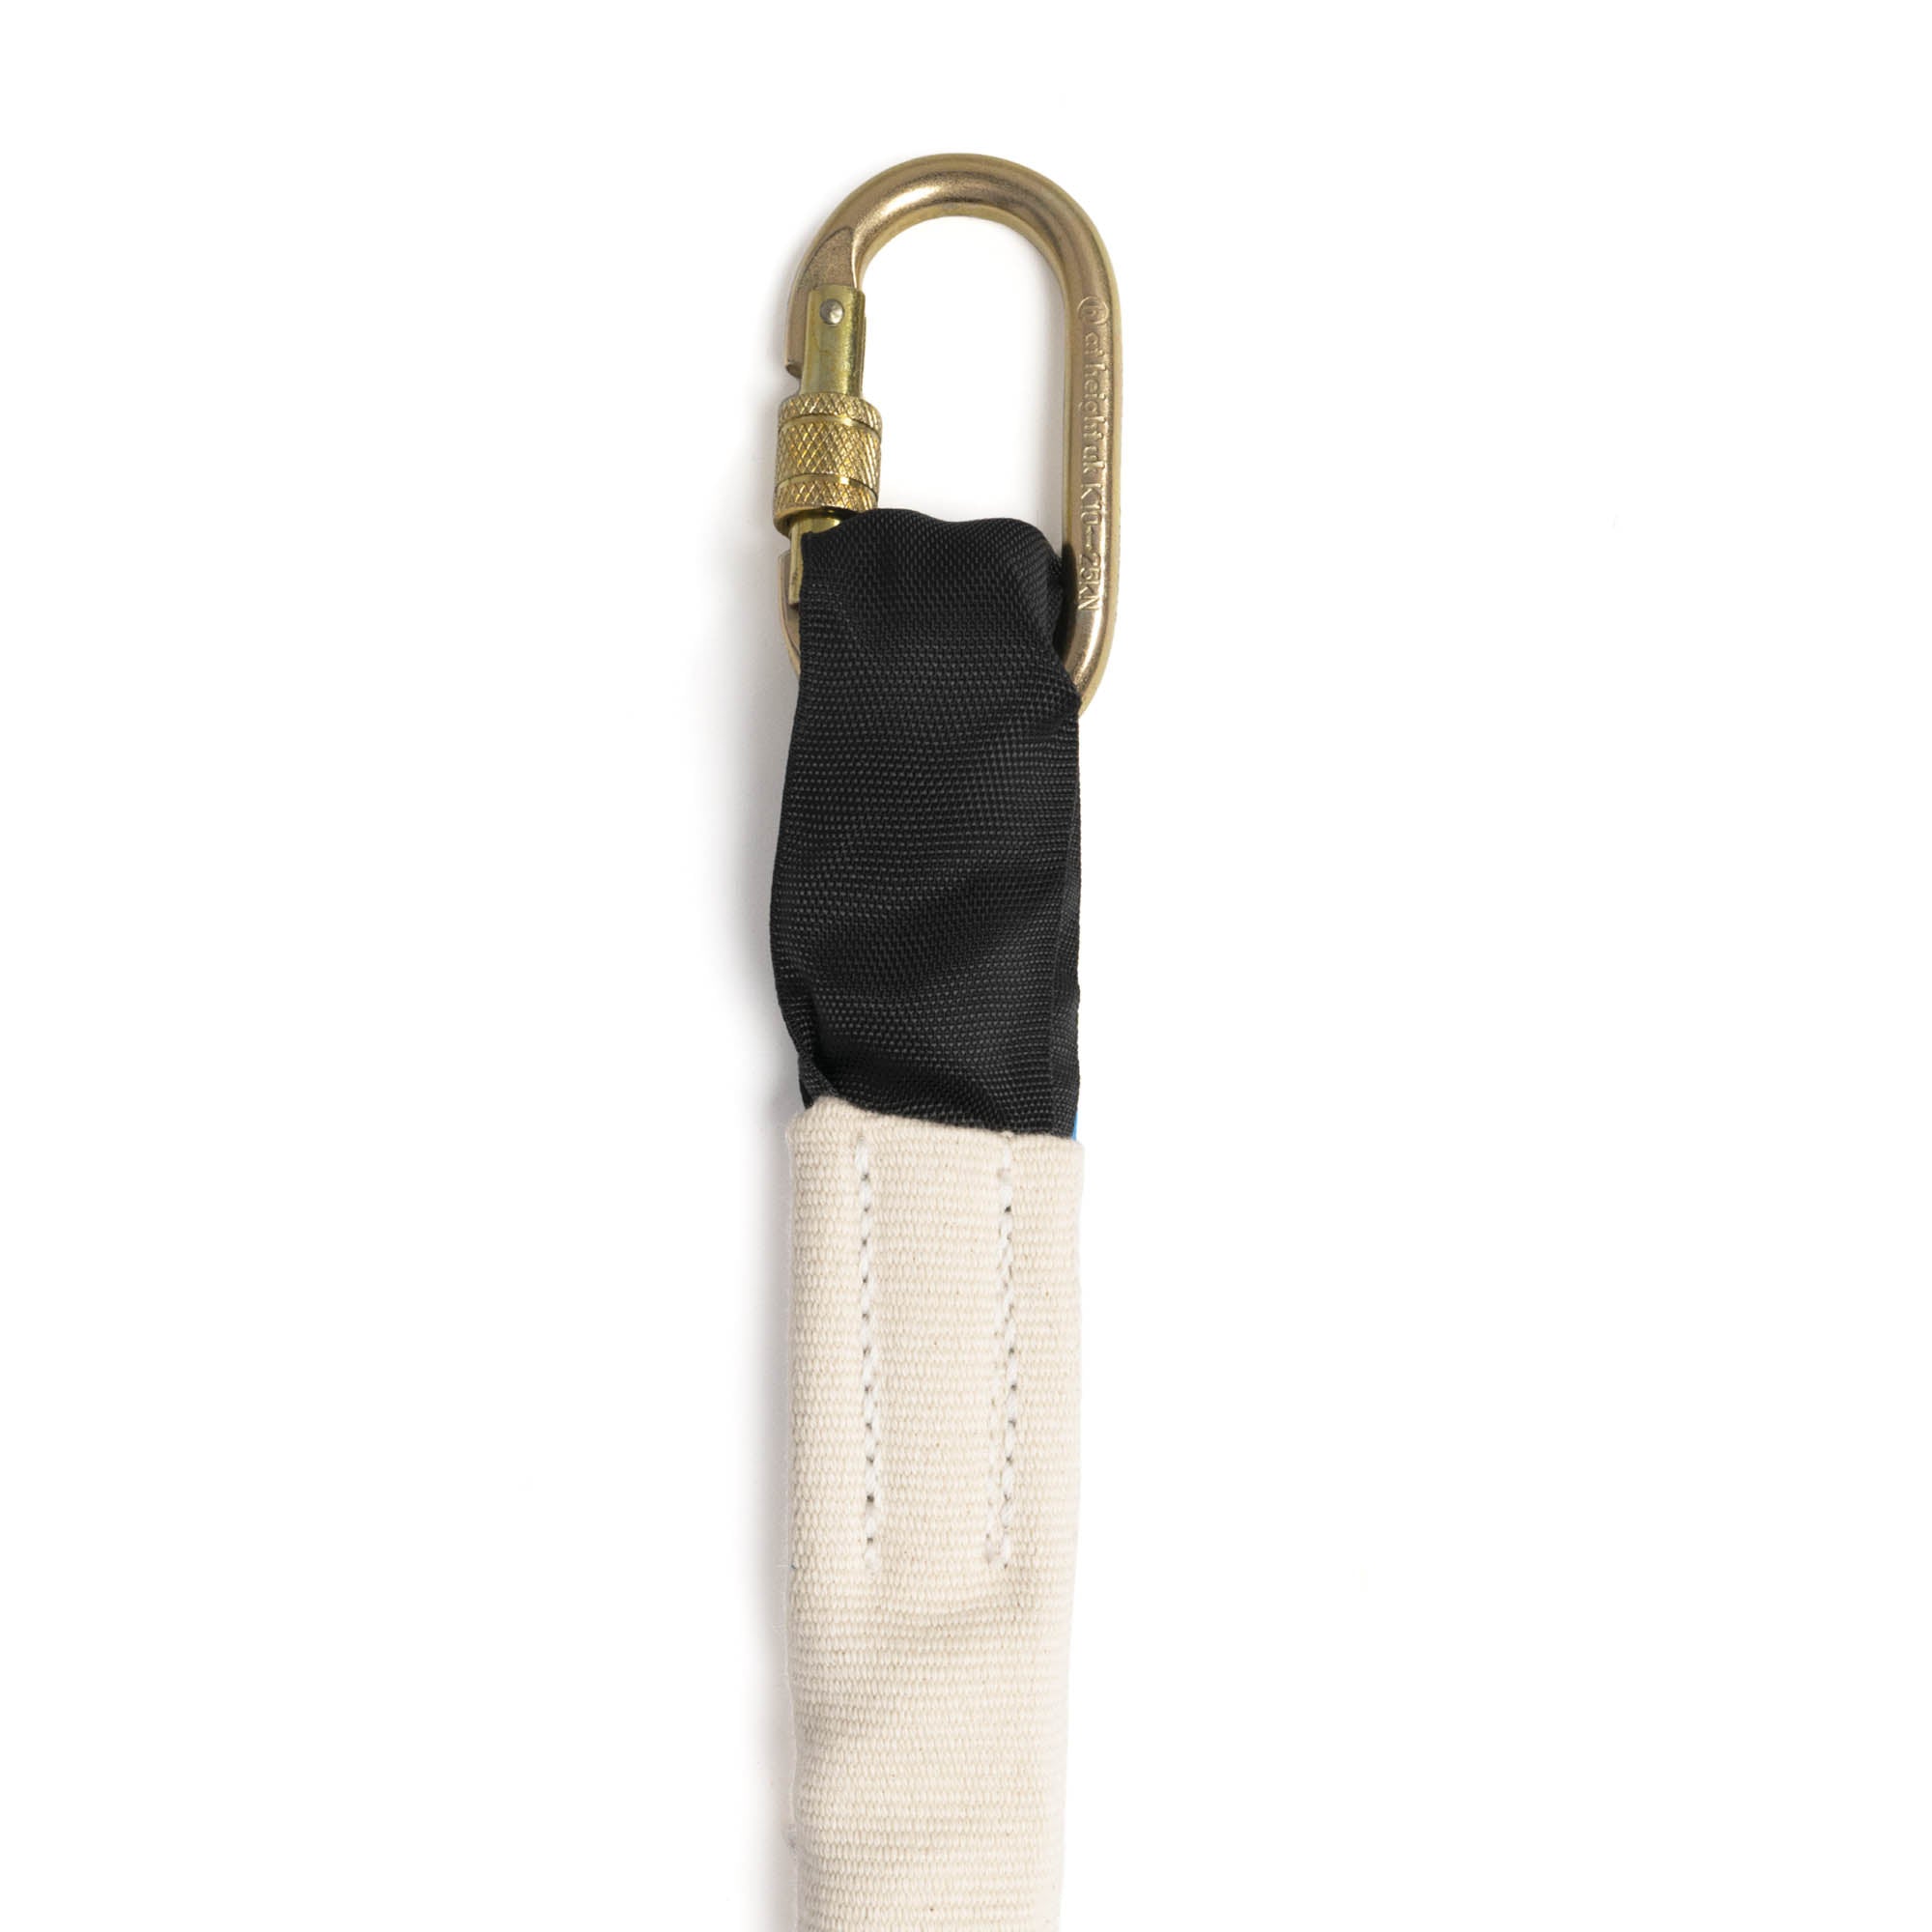 Cottonsafe shackle trapeze carabiner end close up